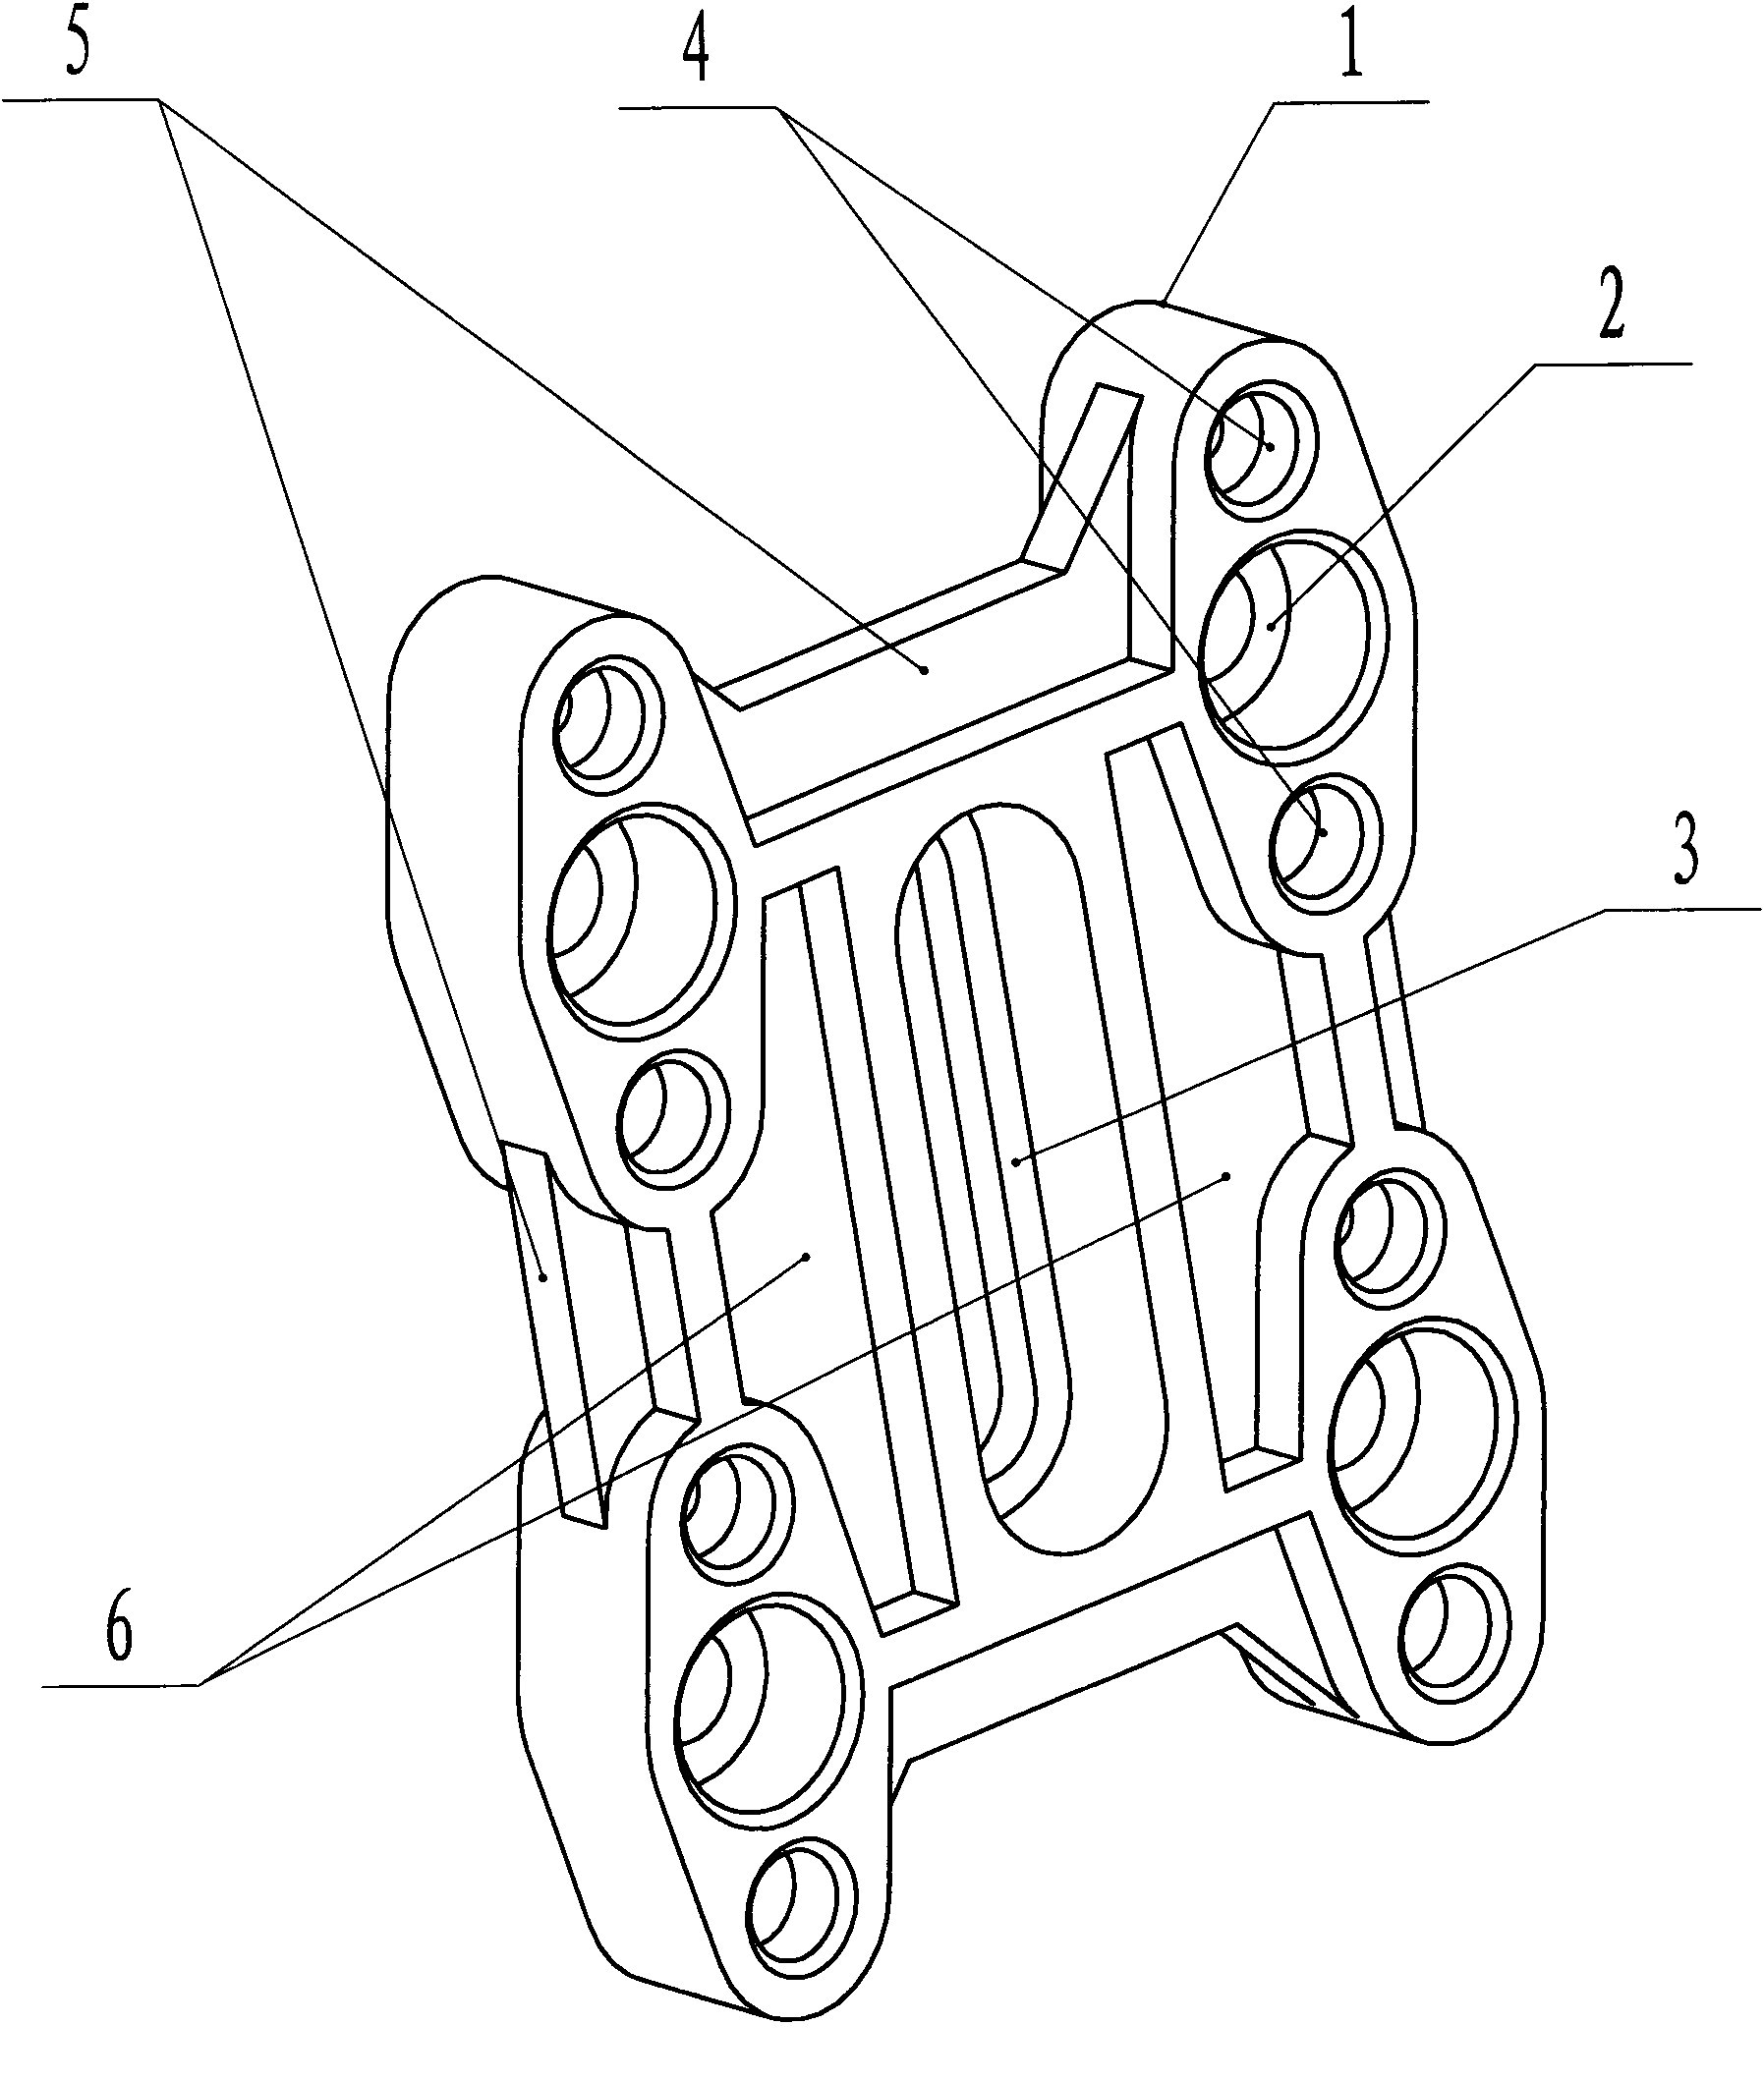 Connecting fastener